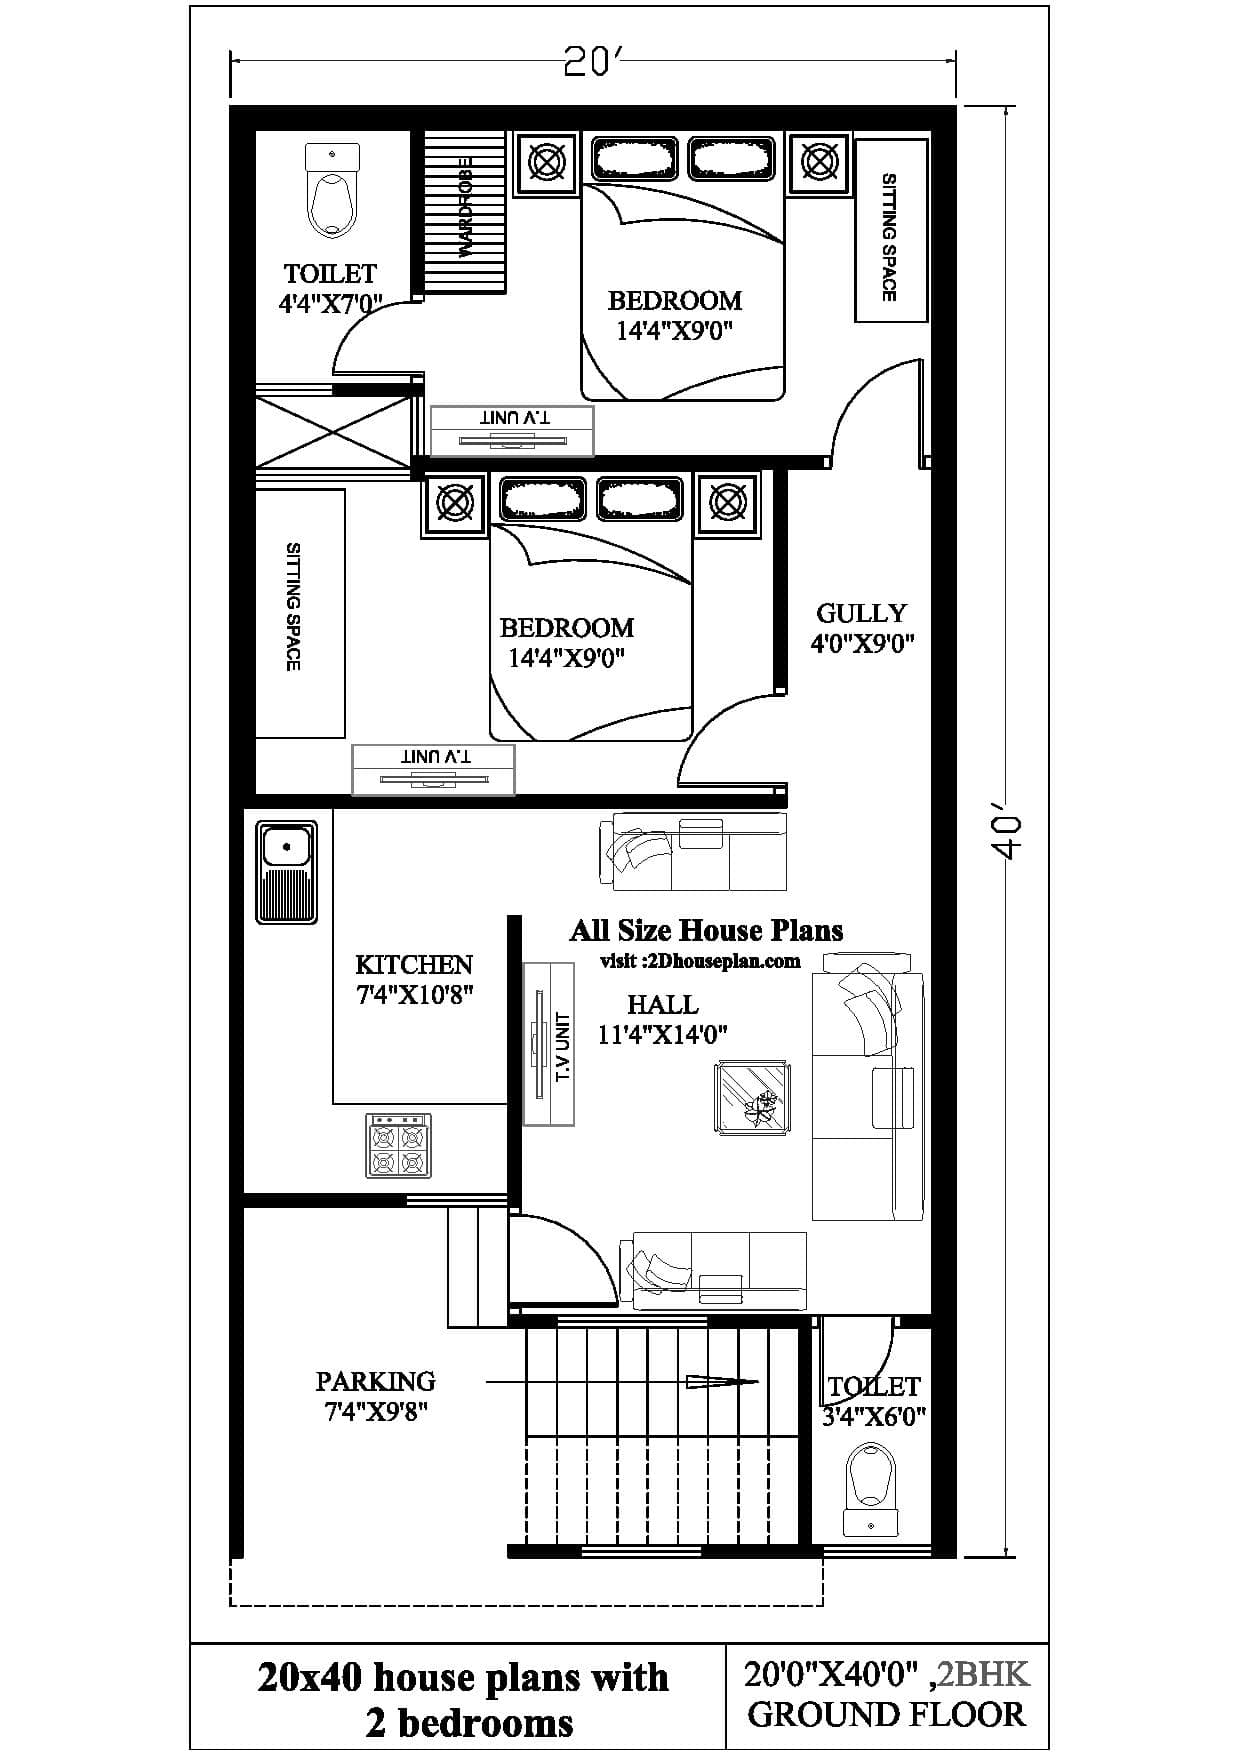 20x40 house plans with 2 bedrooms